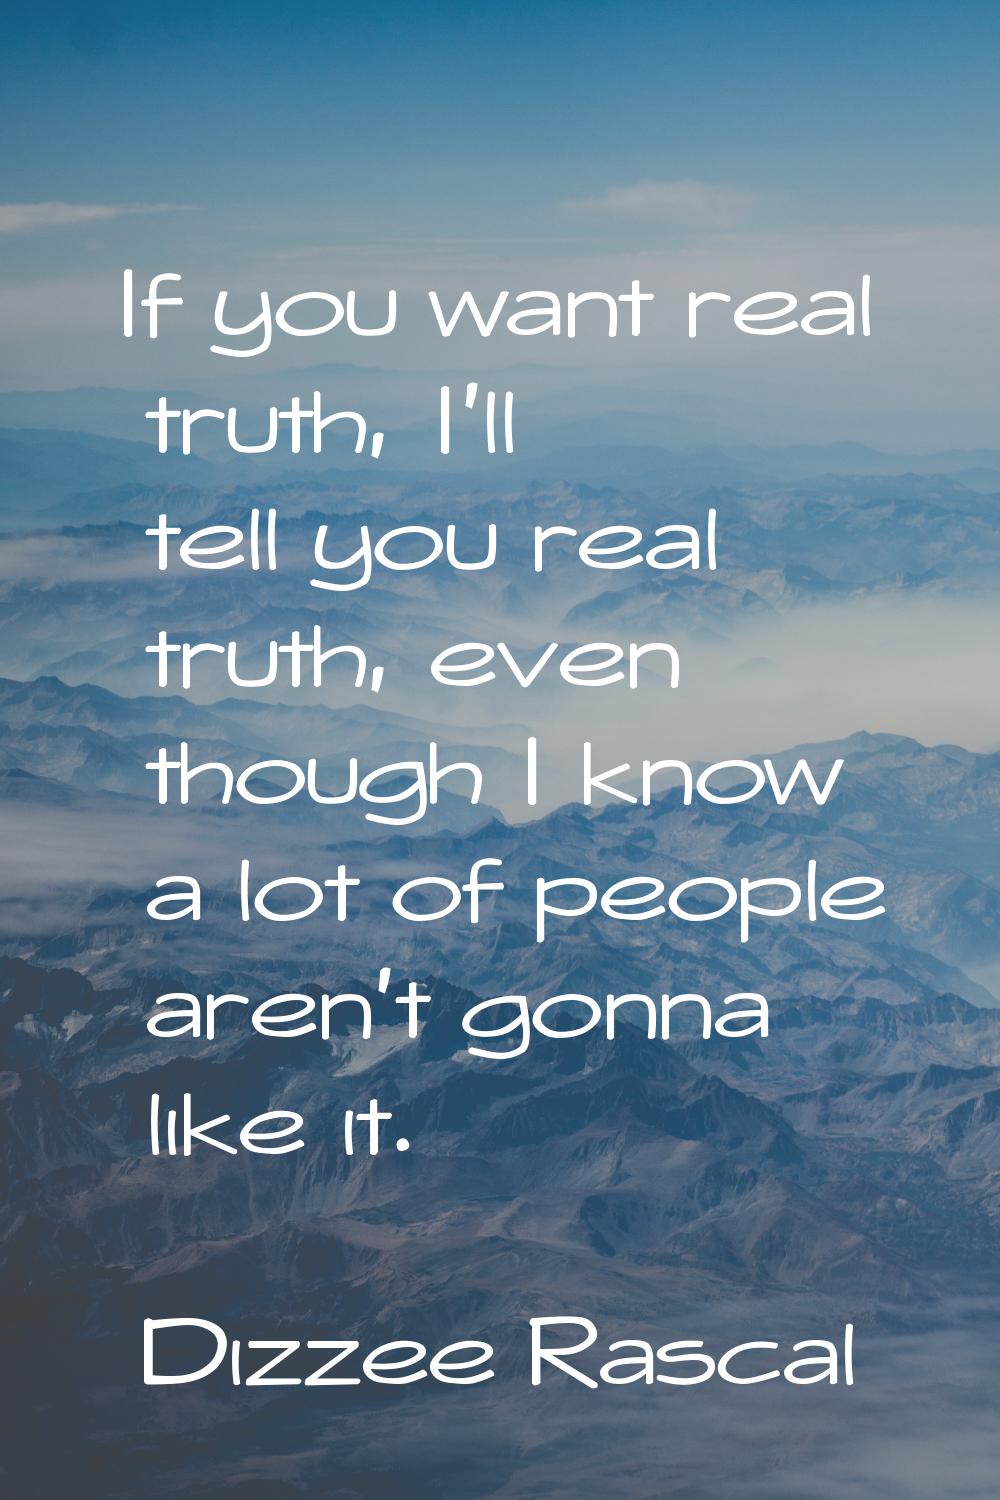 If you want real truth, I'll tell you real truth, even though I know a lot of people aren't gonna l